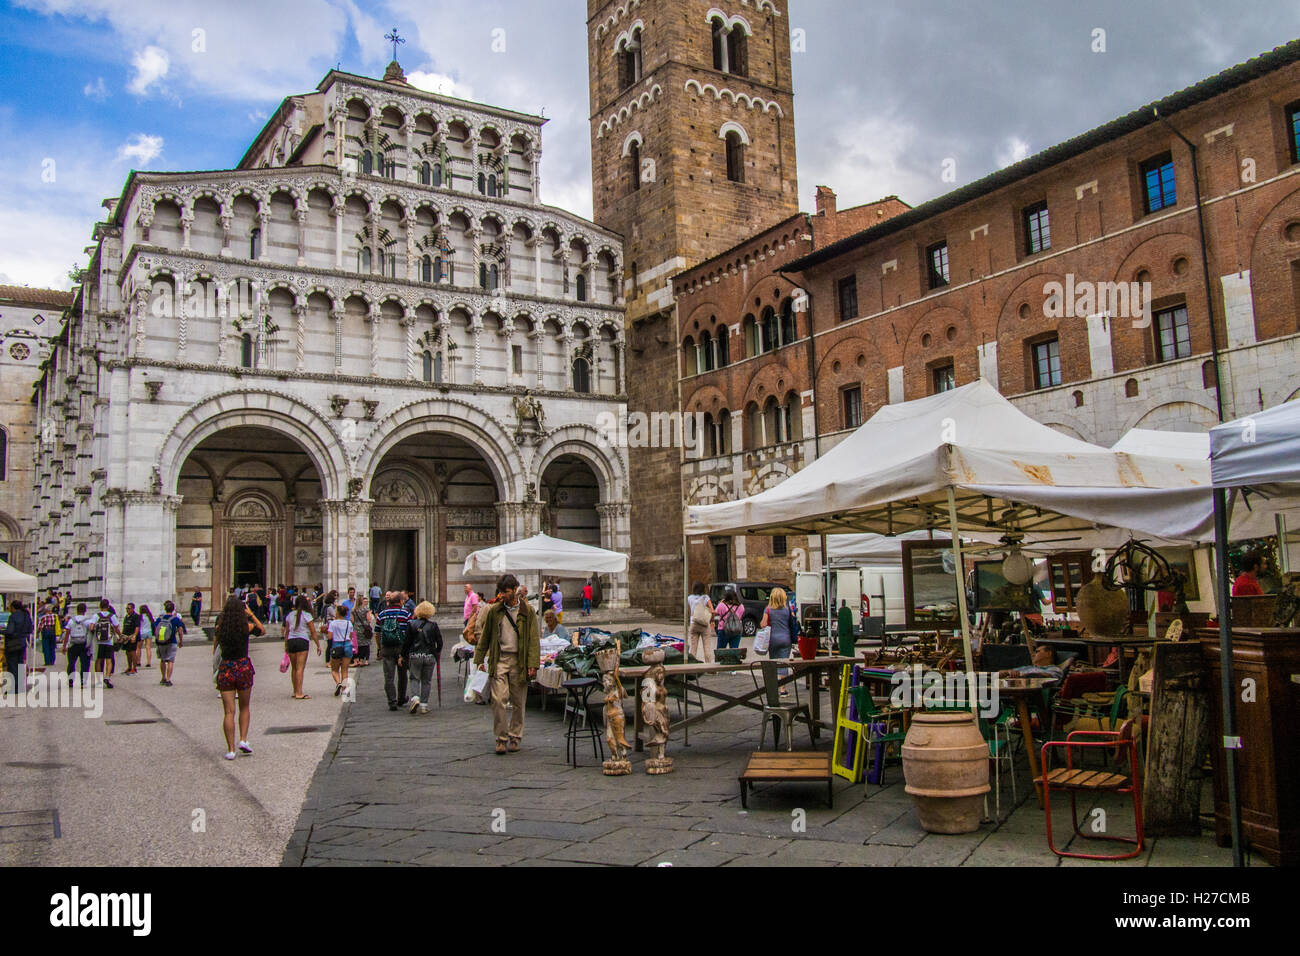 Cathedral (Duomo) of San Martino on market day in Lucca, Tuscany, Italy. Stock Photo